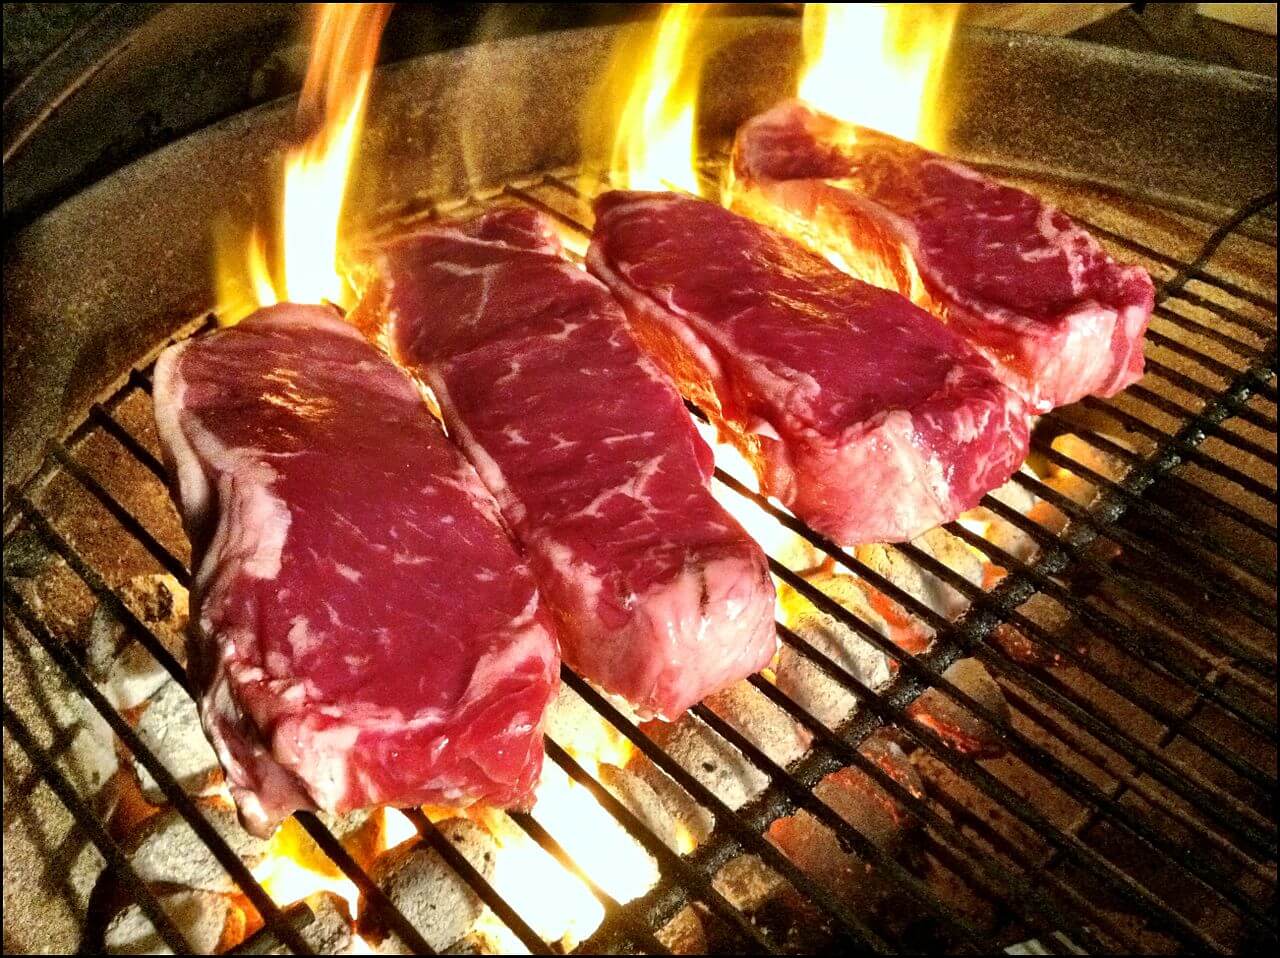 A set of four steaks on a grill